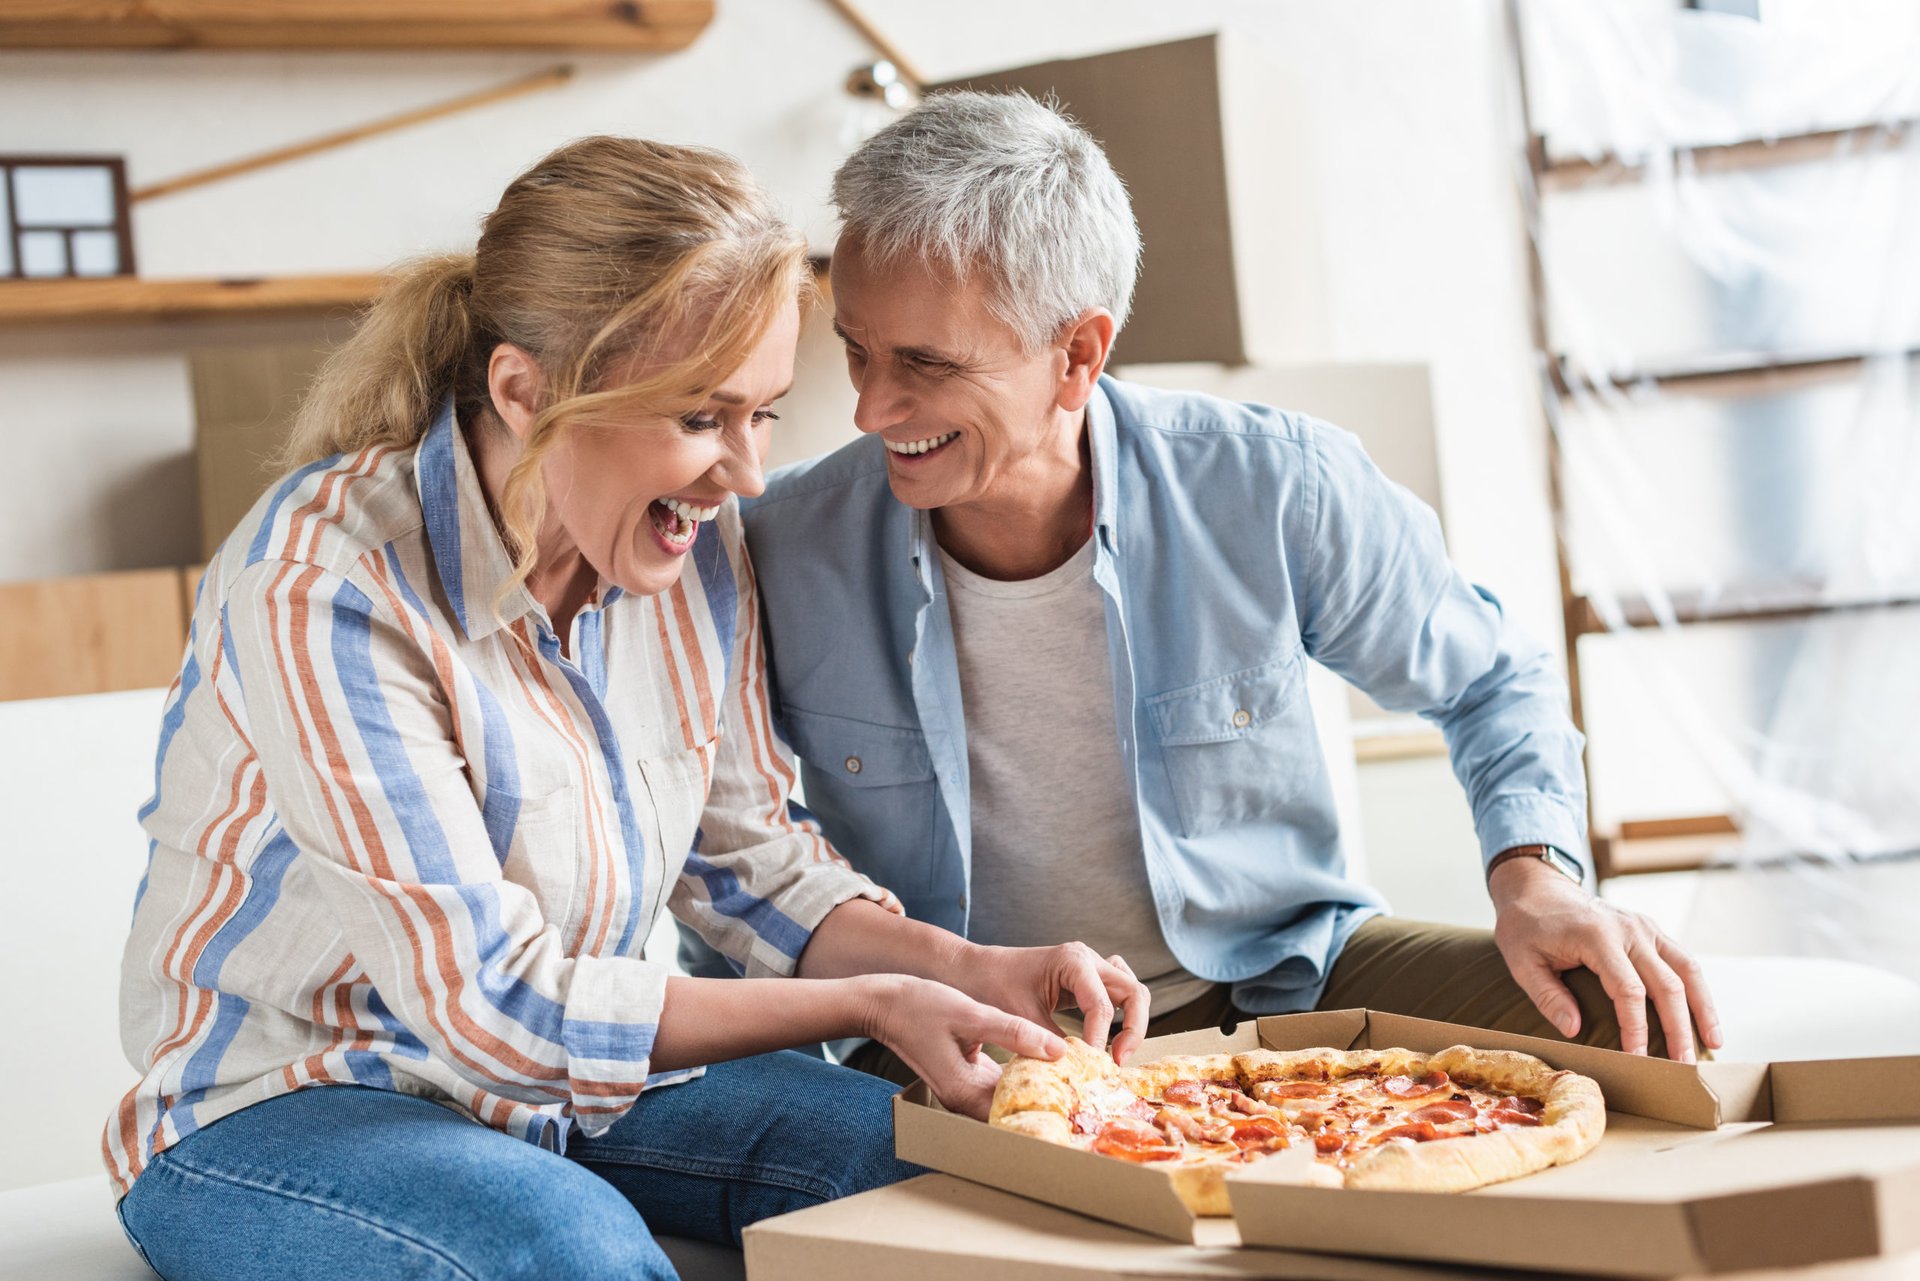 An older couple eats pizza at home